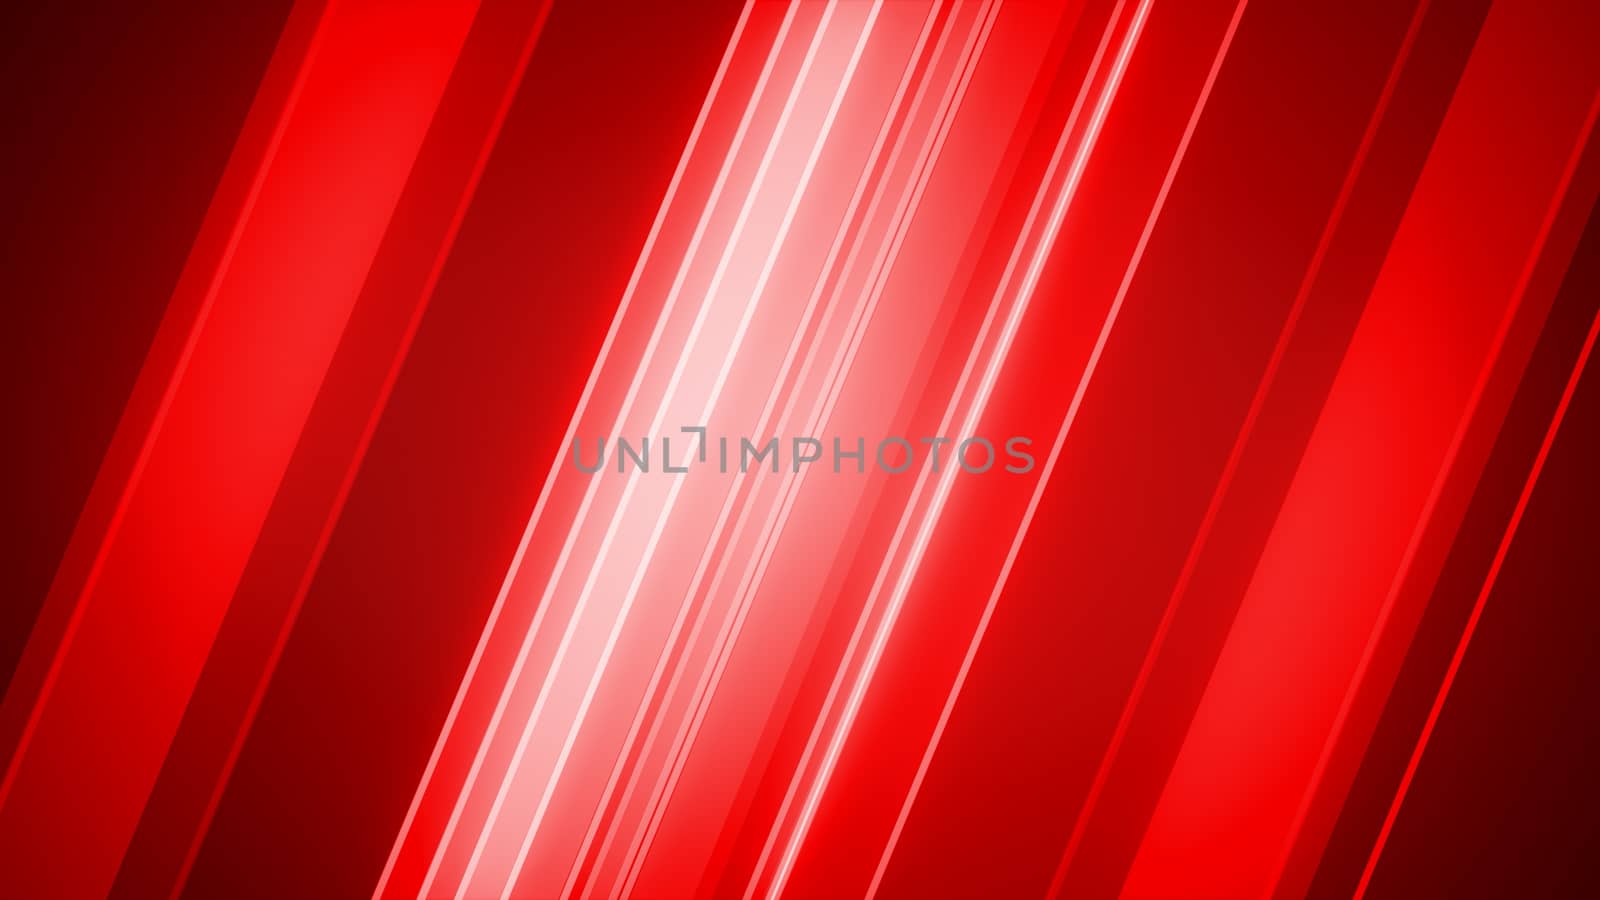 Impressive 3d illustration of red Abstract Background with smooth diagonal lines